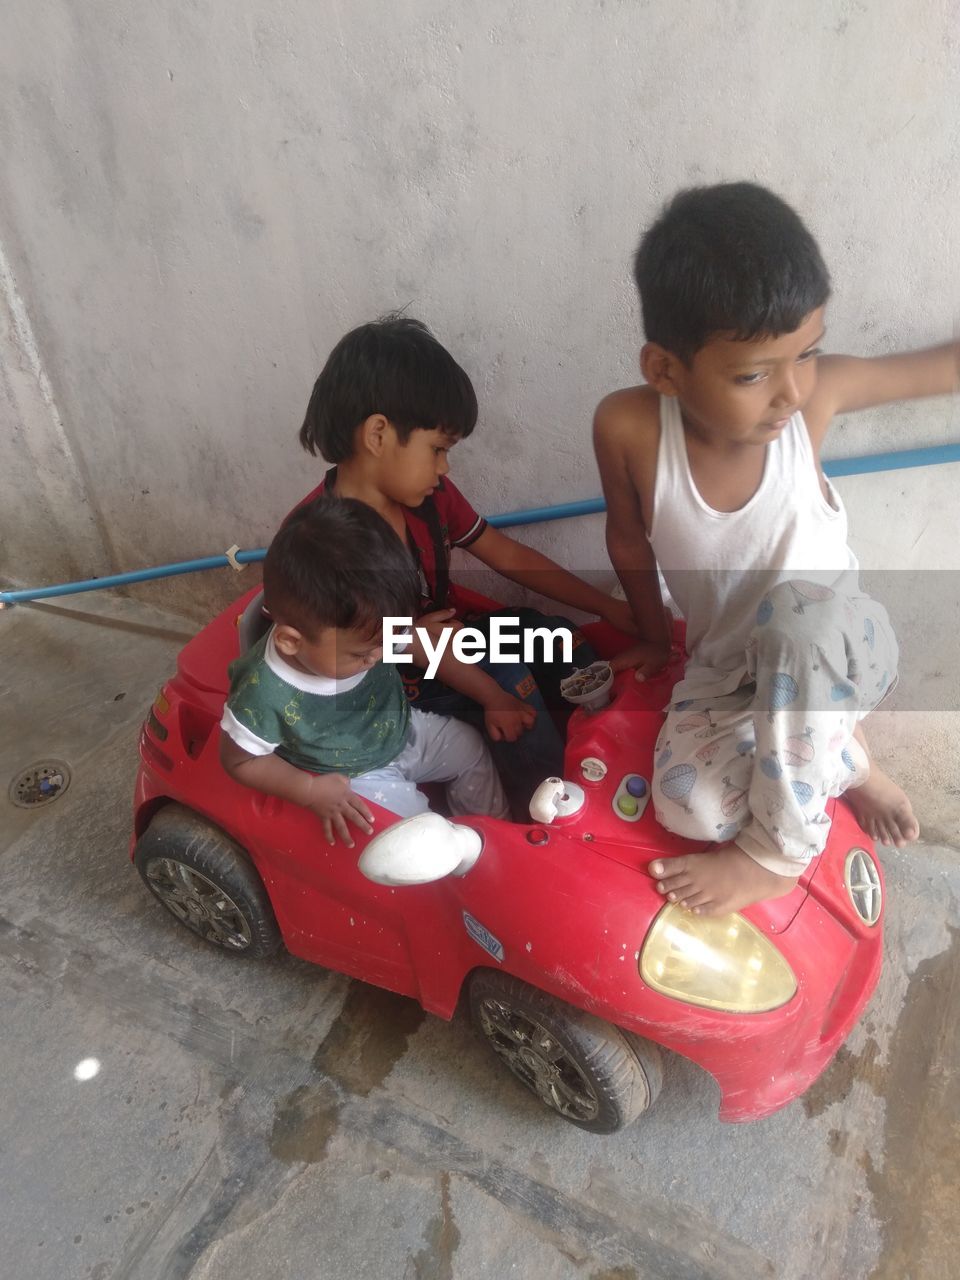 childhood, child, men, toddler, baby, togetherness, full length, two people, female, family, high angle view, sitting, person, vehicle, casual clothing, toy, women, red, bonding, friendship, car, leisure activity, transportation, happiness, emotion, lifestyles, day, toy car, fun, cute, positive emotion, human face, innocence, looking, land vehicle, adult, smiling, outdoors